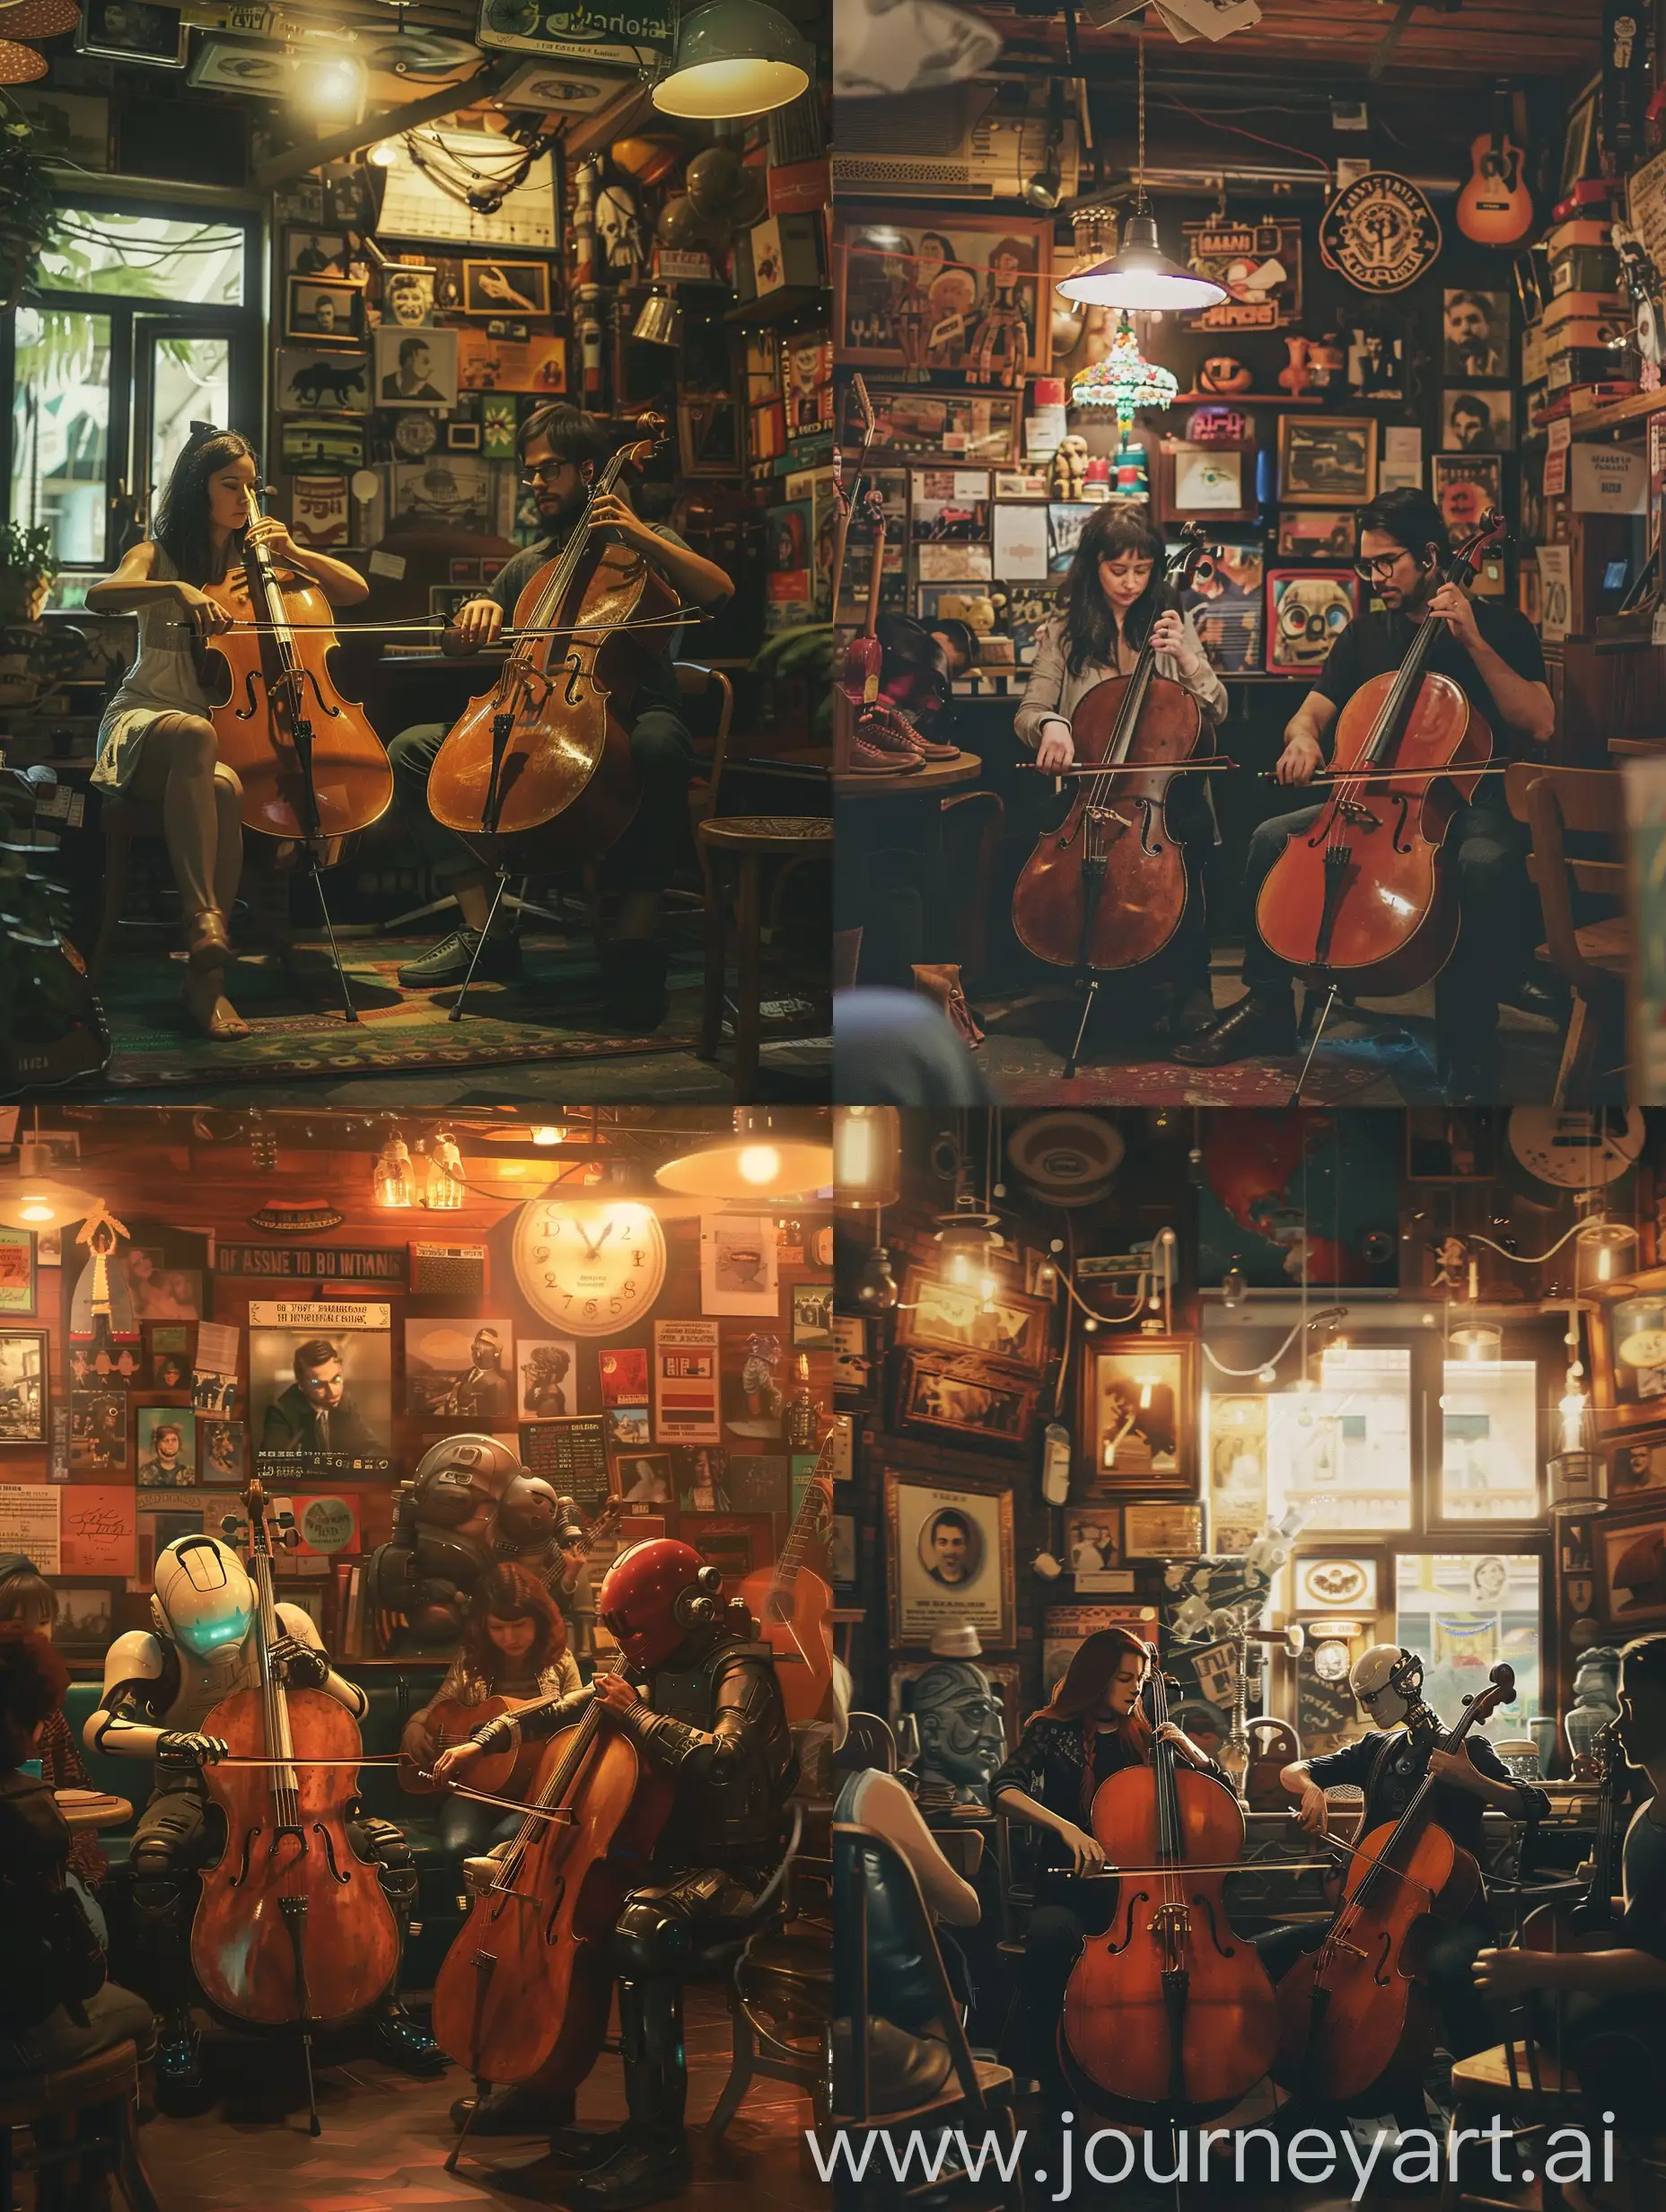 In the warm glow of a vintage-looking café, a group of robots(women&man) gather intimately for a live session. The cellist and guitarist are at the heart of this impromptu concert, playing passionately to an audience of music lovers. Surrounded by walls adorned with eclectic memorabilia, the setting adds a charmingly nostalgic vibe that complements the acoustic melodies filling the air. It's a snapshot that encapsulates the essence of bohemian life, where every note seems to tell a story.